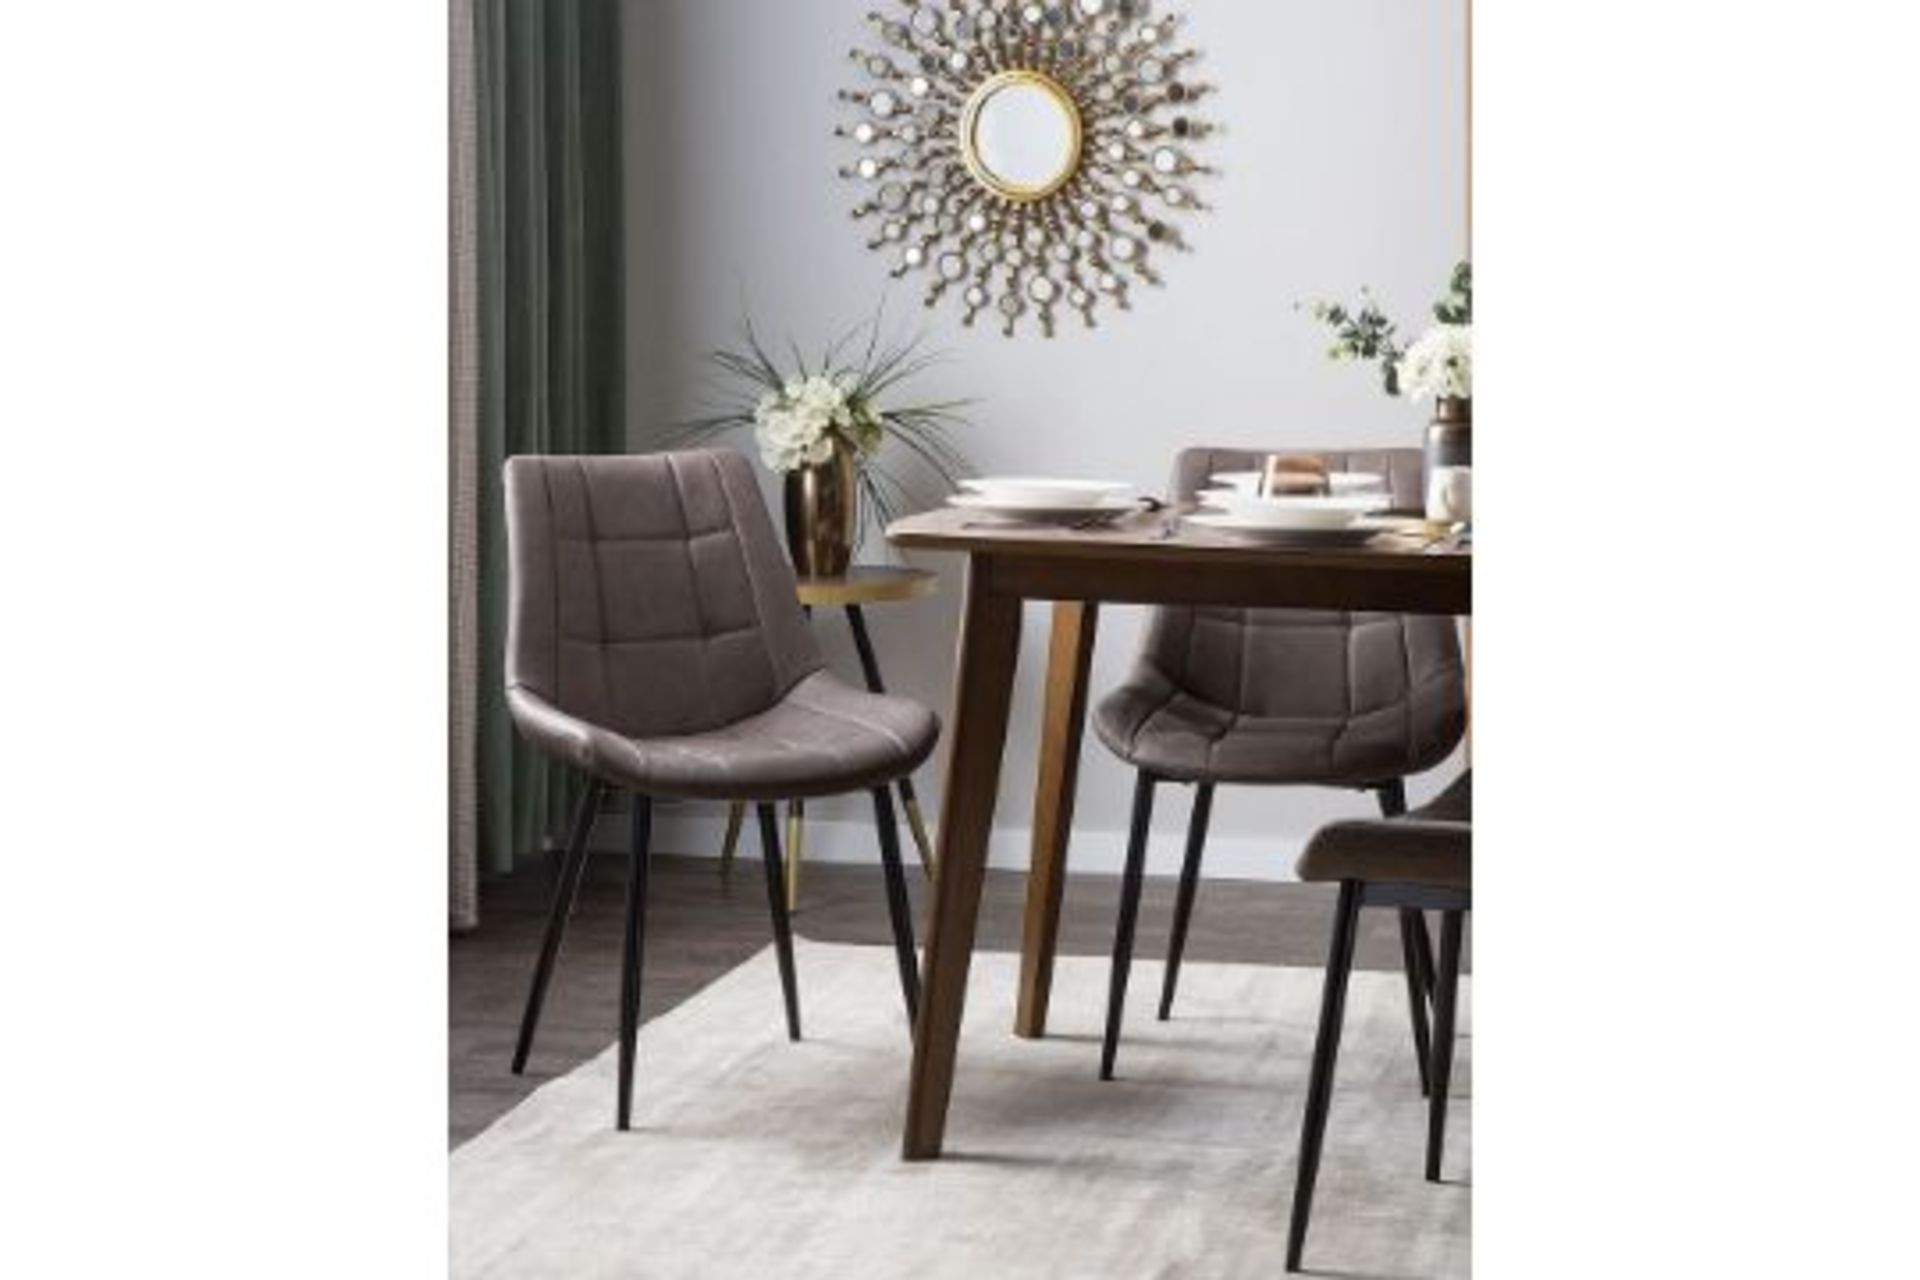 Melrose Set of 2 Faux Leather Dining Chairs Brown 58/12. - ER24. RRP £219.99. Bring an upscale